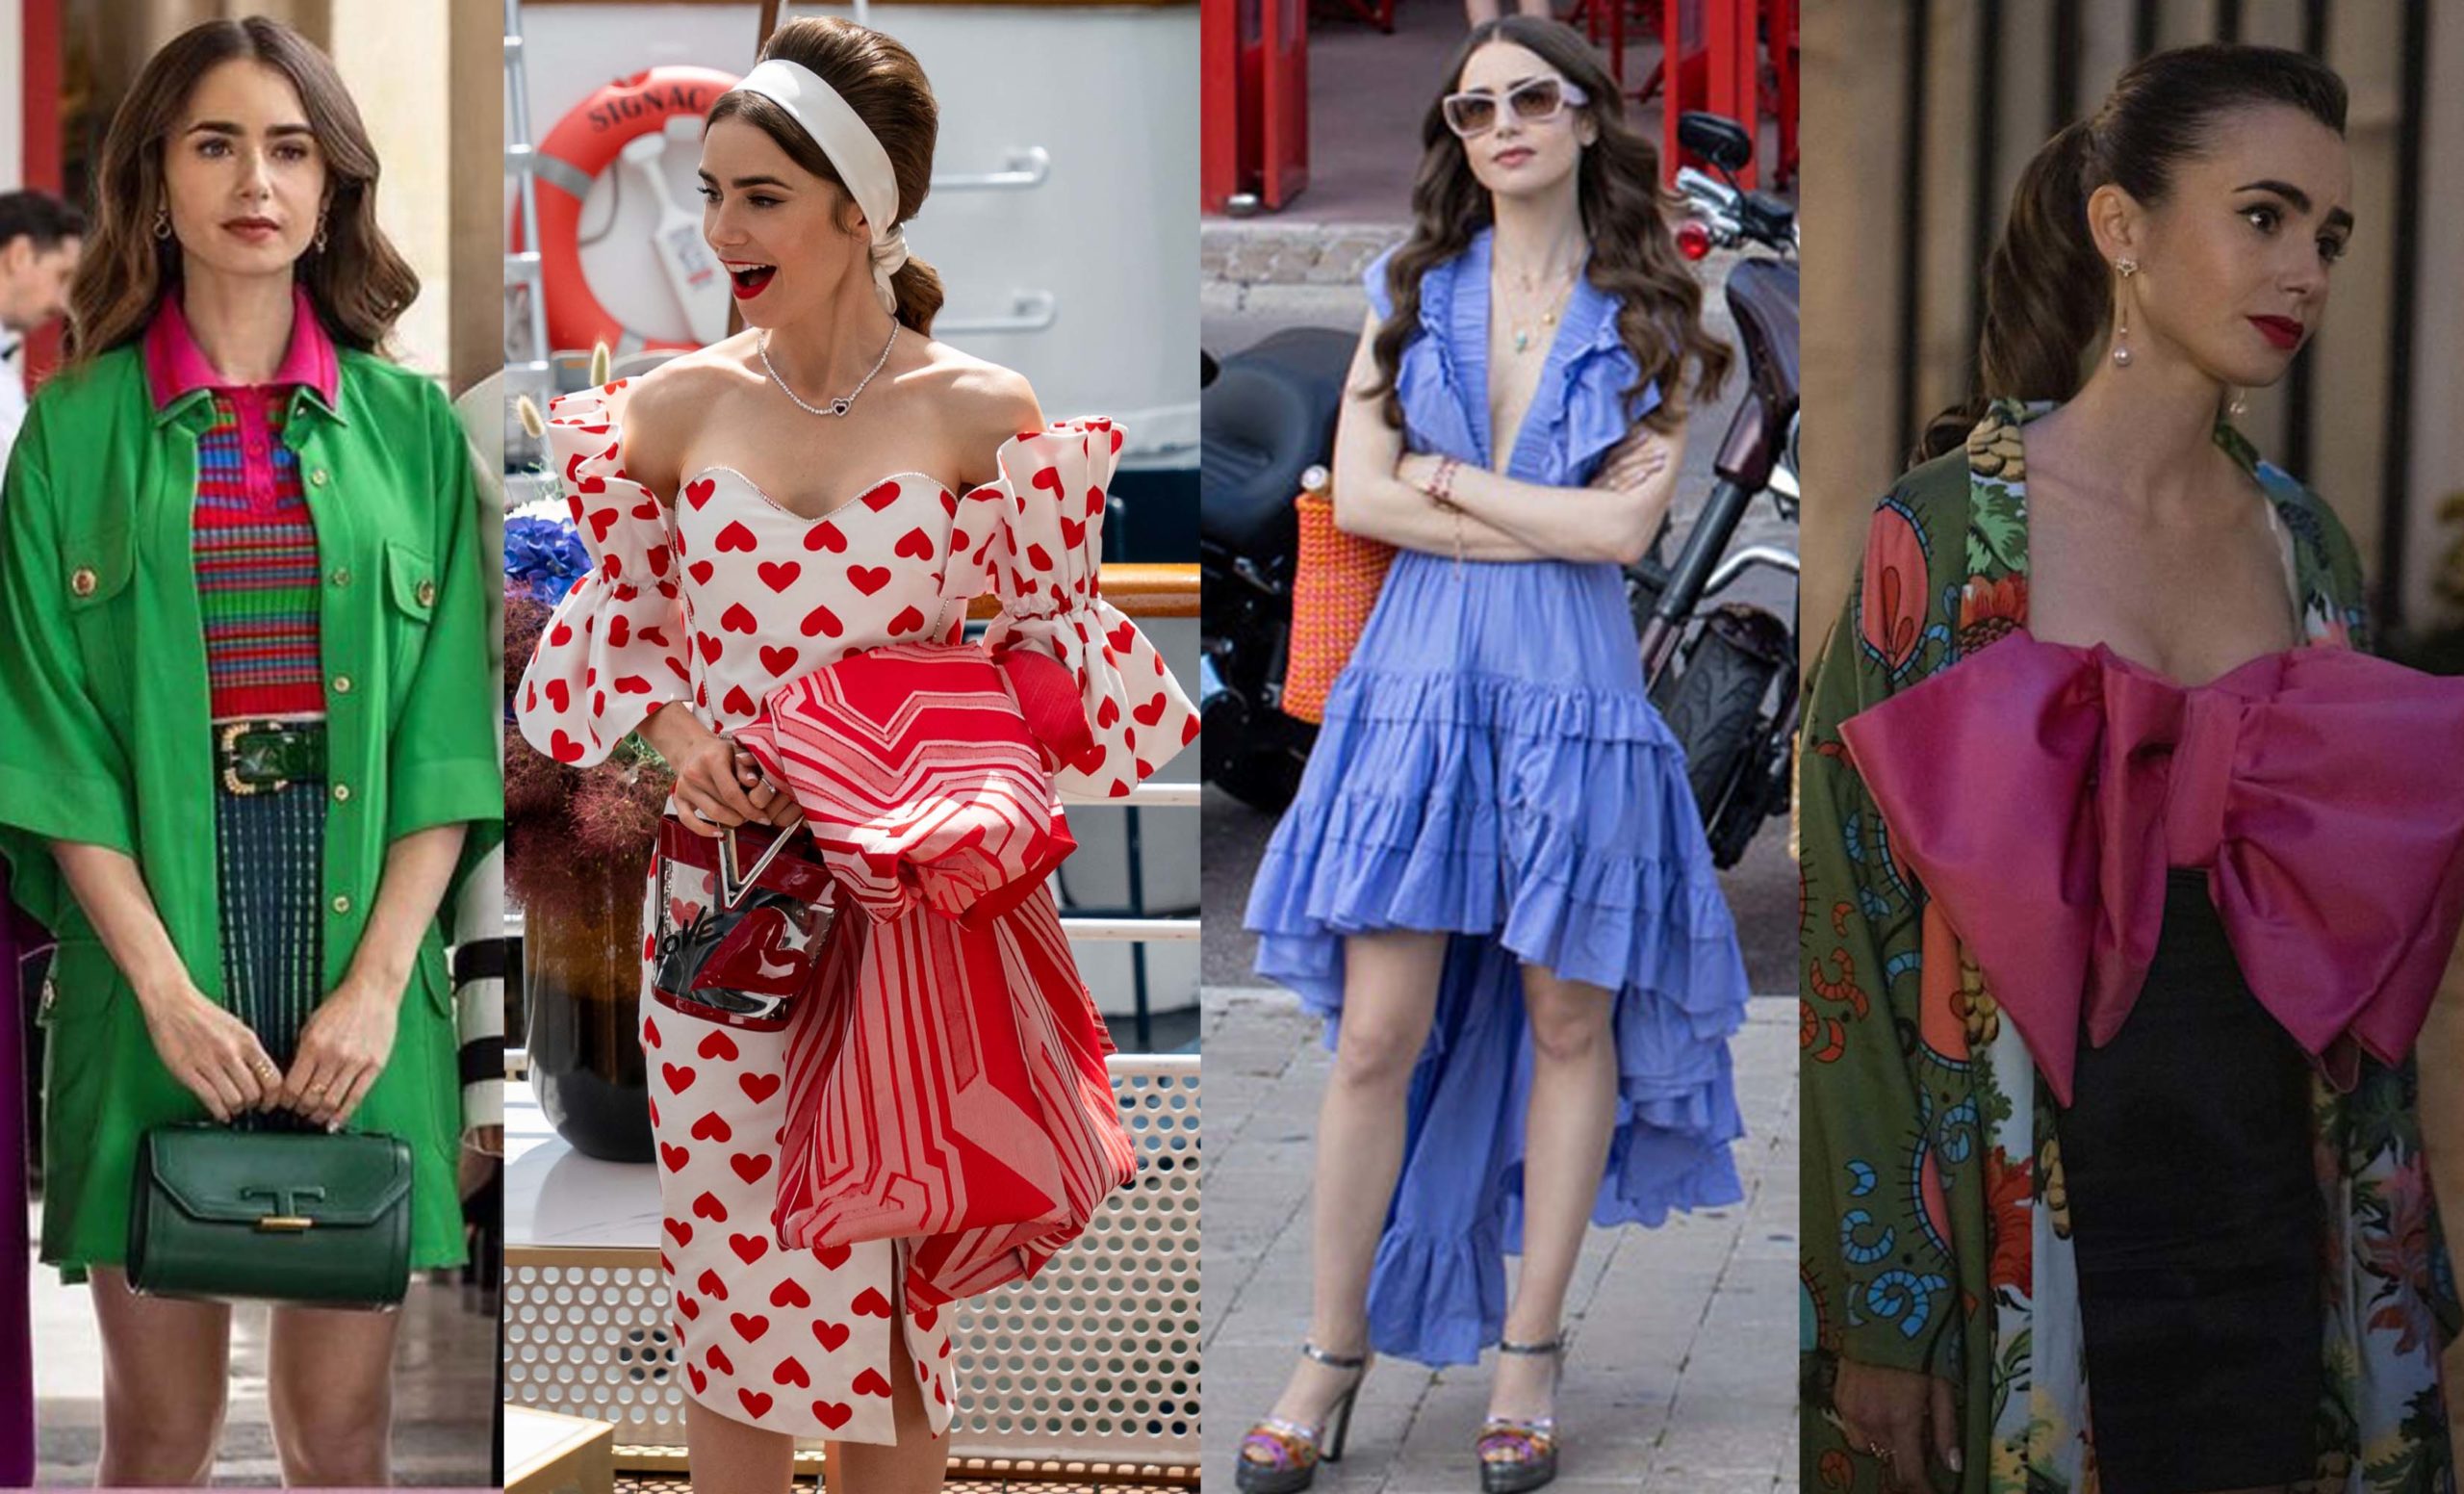 Emily’s Wardrobe In The Season 2 Of ‘Emily In Paris’ Proves “Too much good taste is boring”